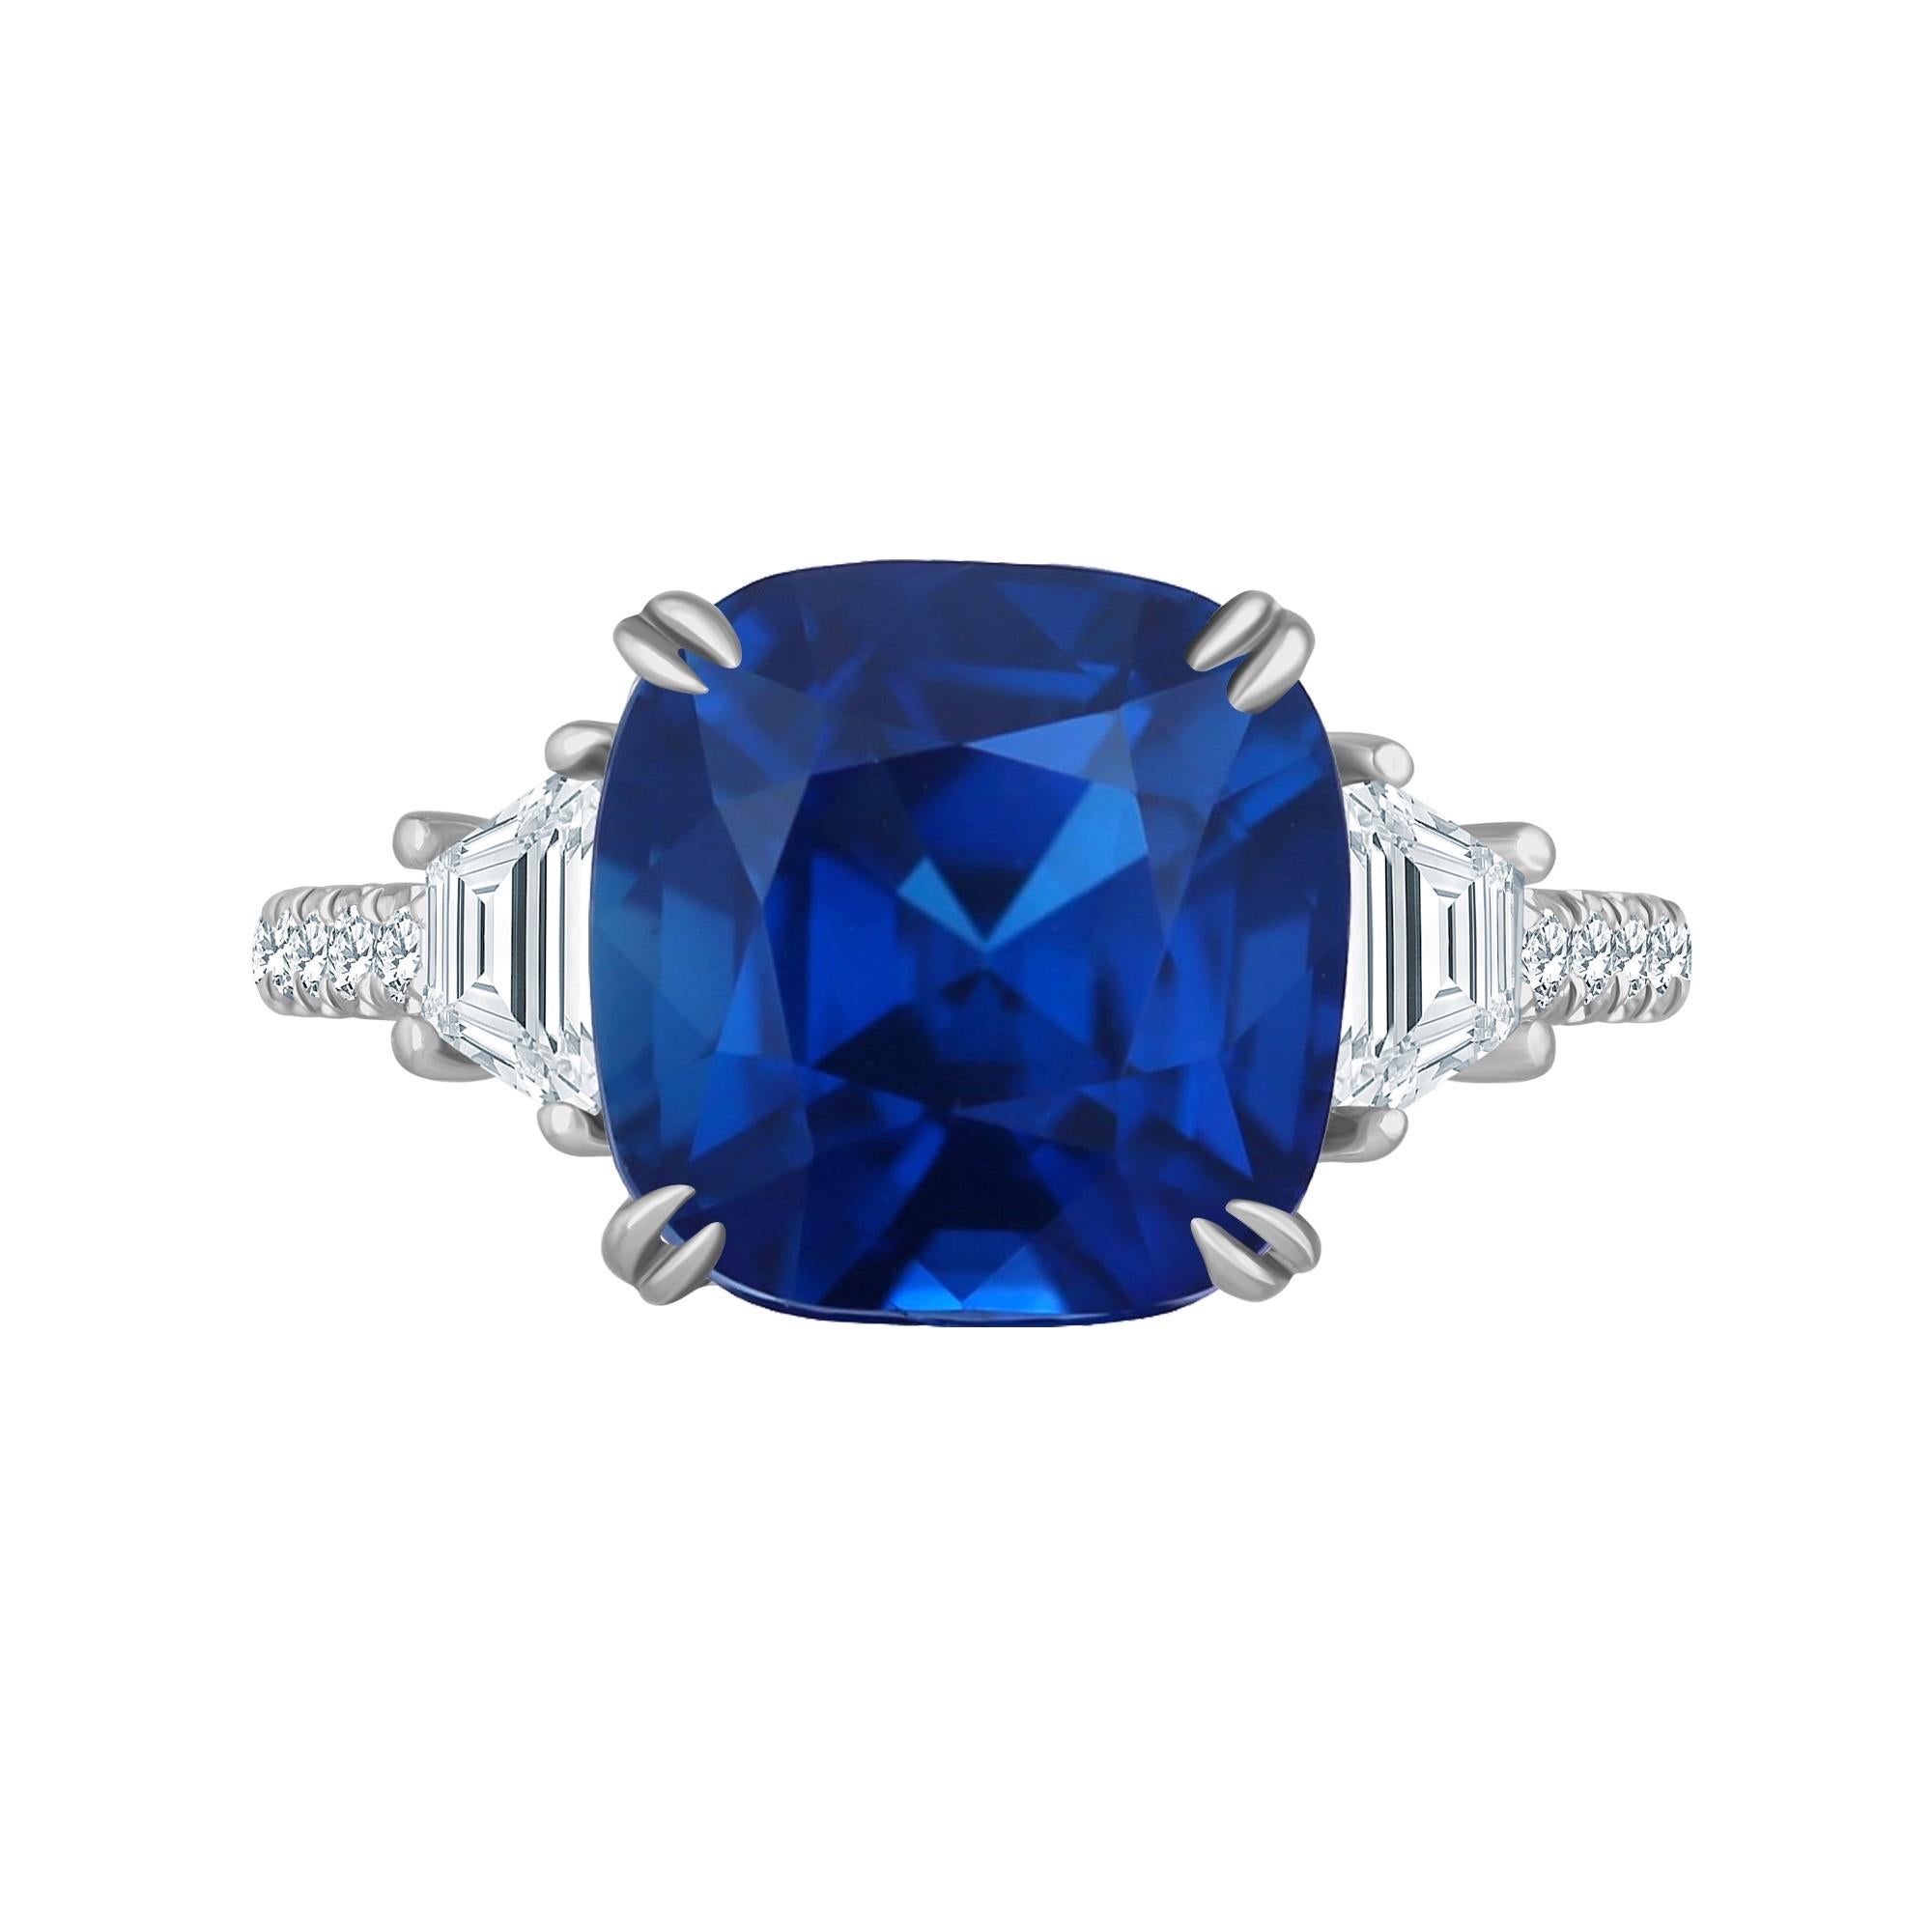 From the vault at Emilio Jewelry New York,
Hand made in platinum, showcasing a magnificent sapphire stated color as Royal Blue on the certificate. Please inquire for details! Total weight shown in title. 